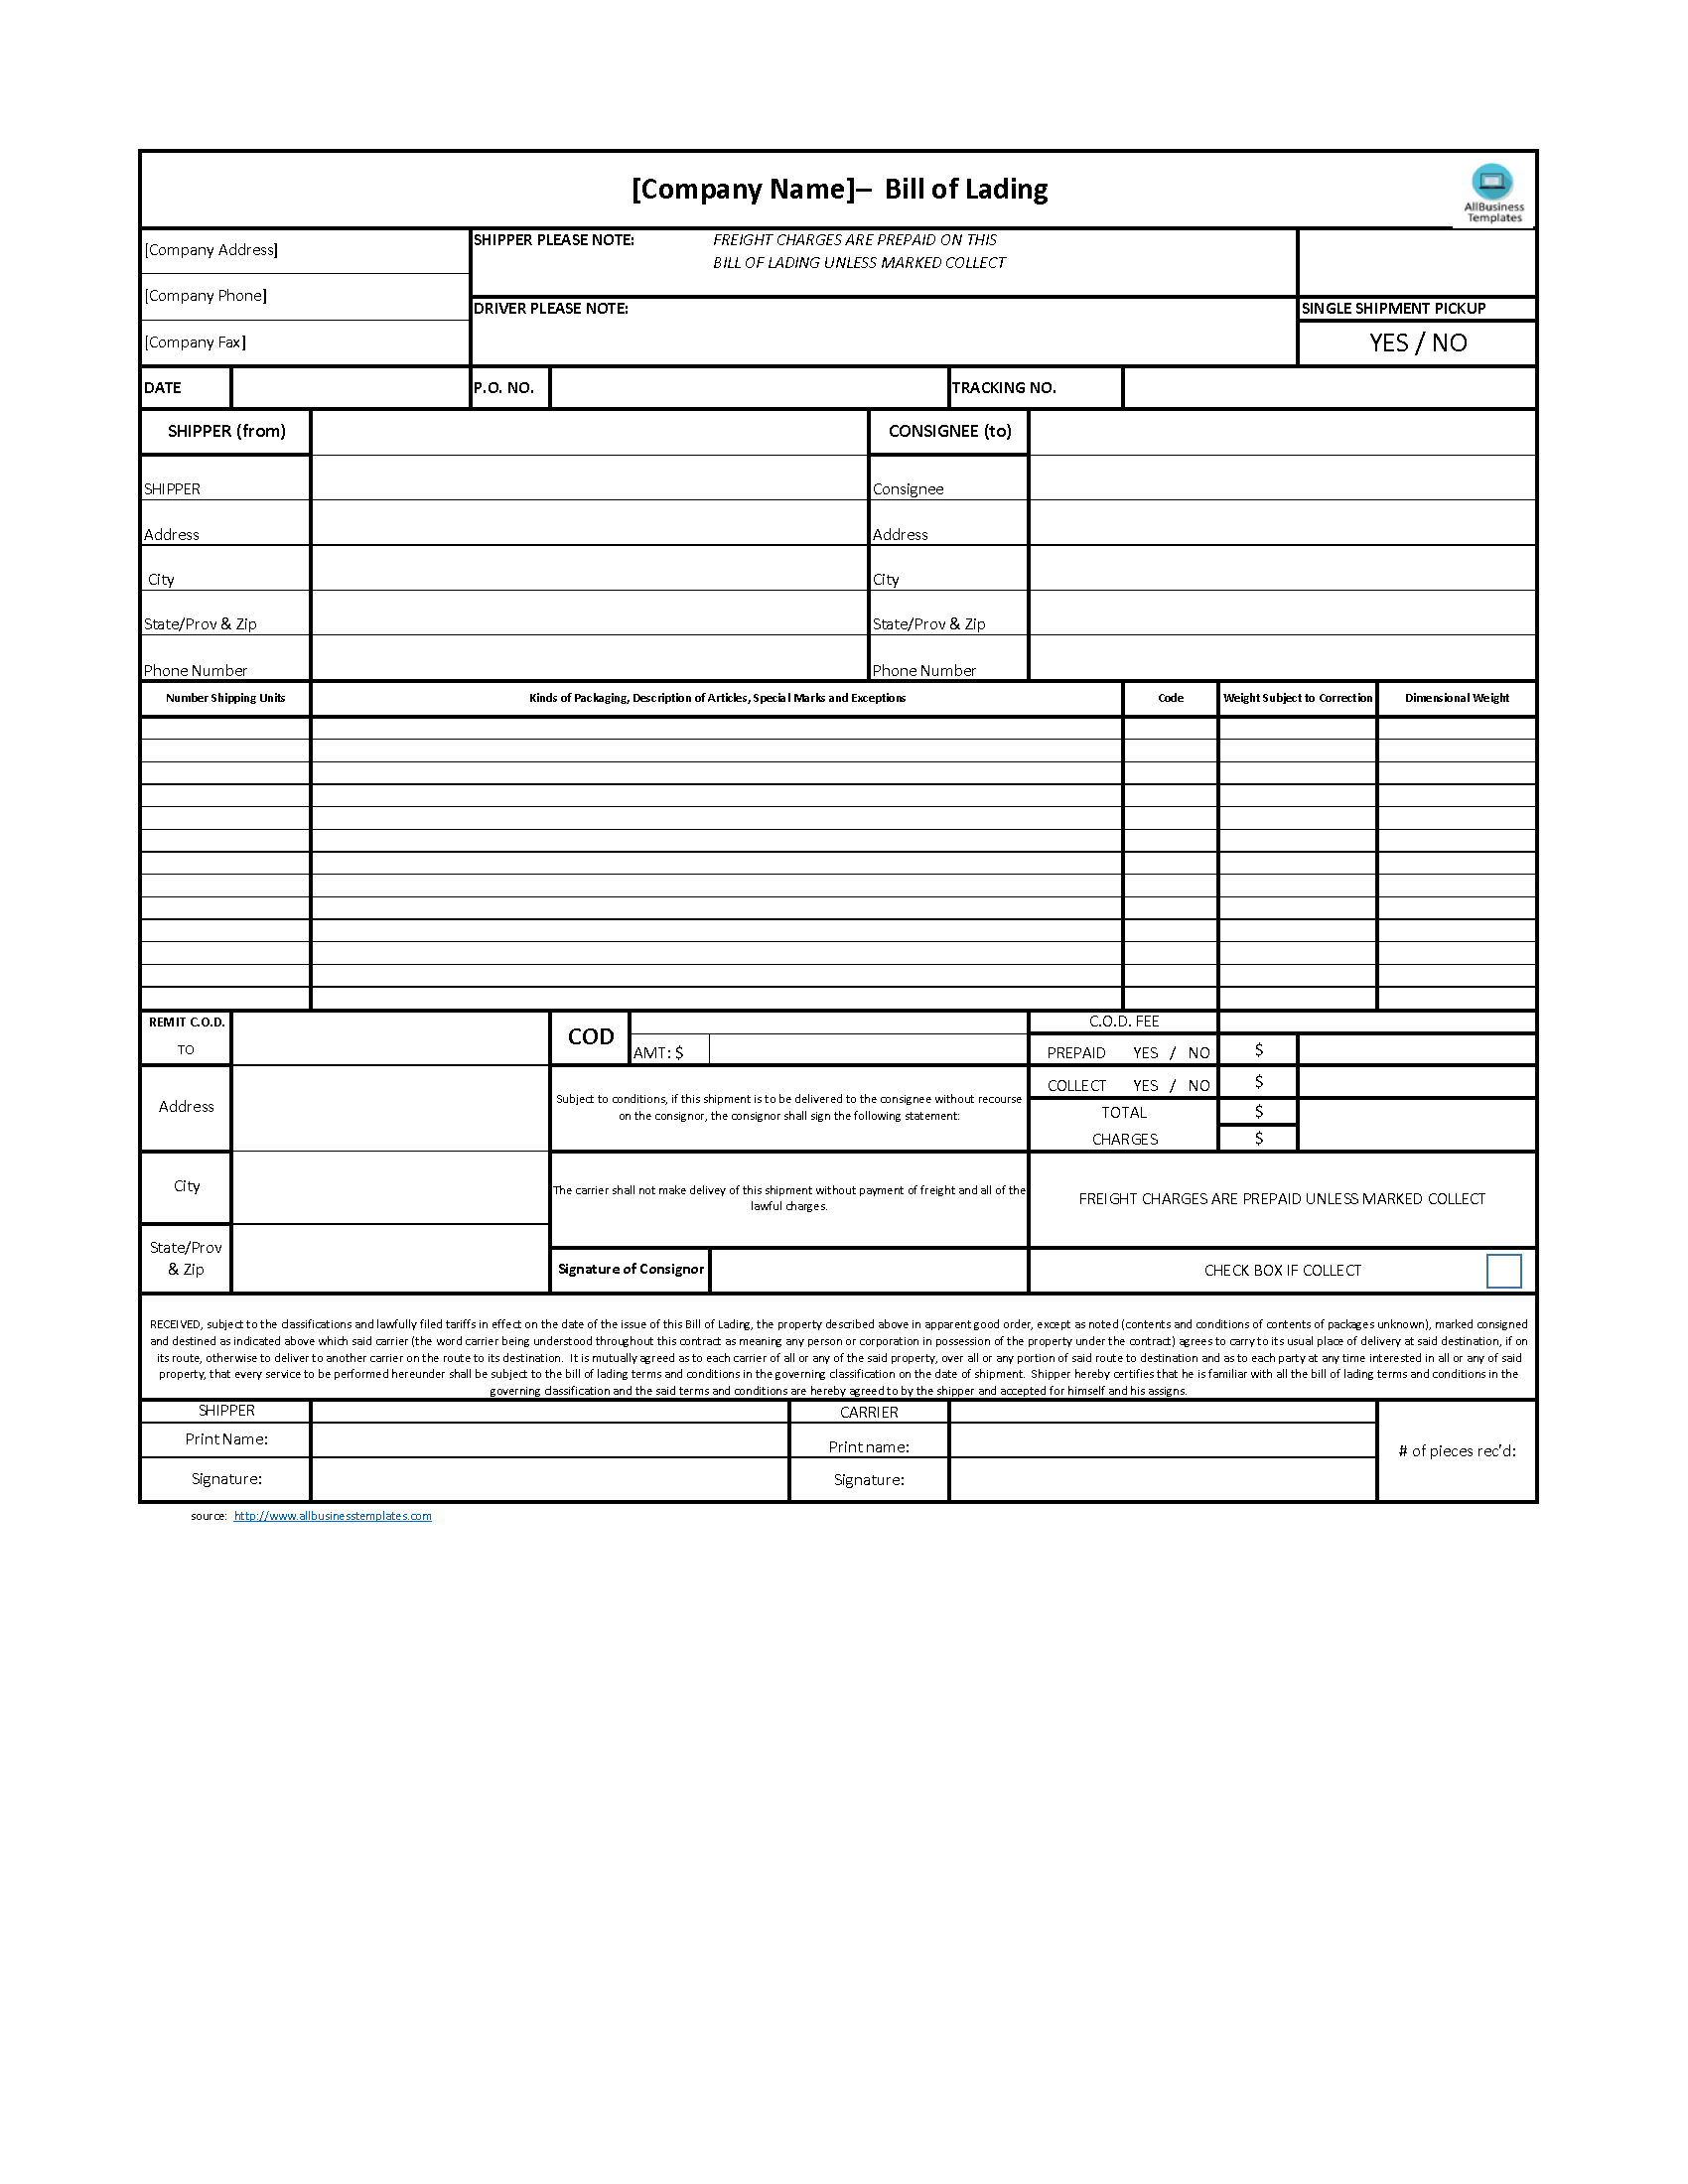 Bill of Lading Excel Template 模板